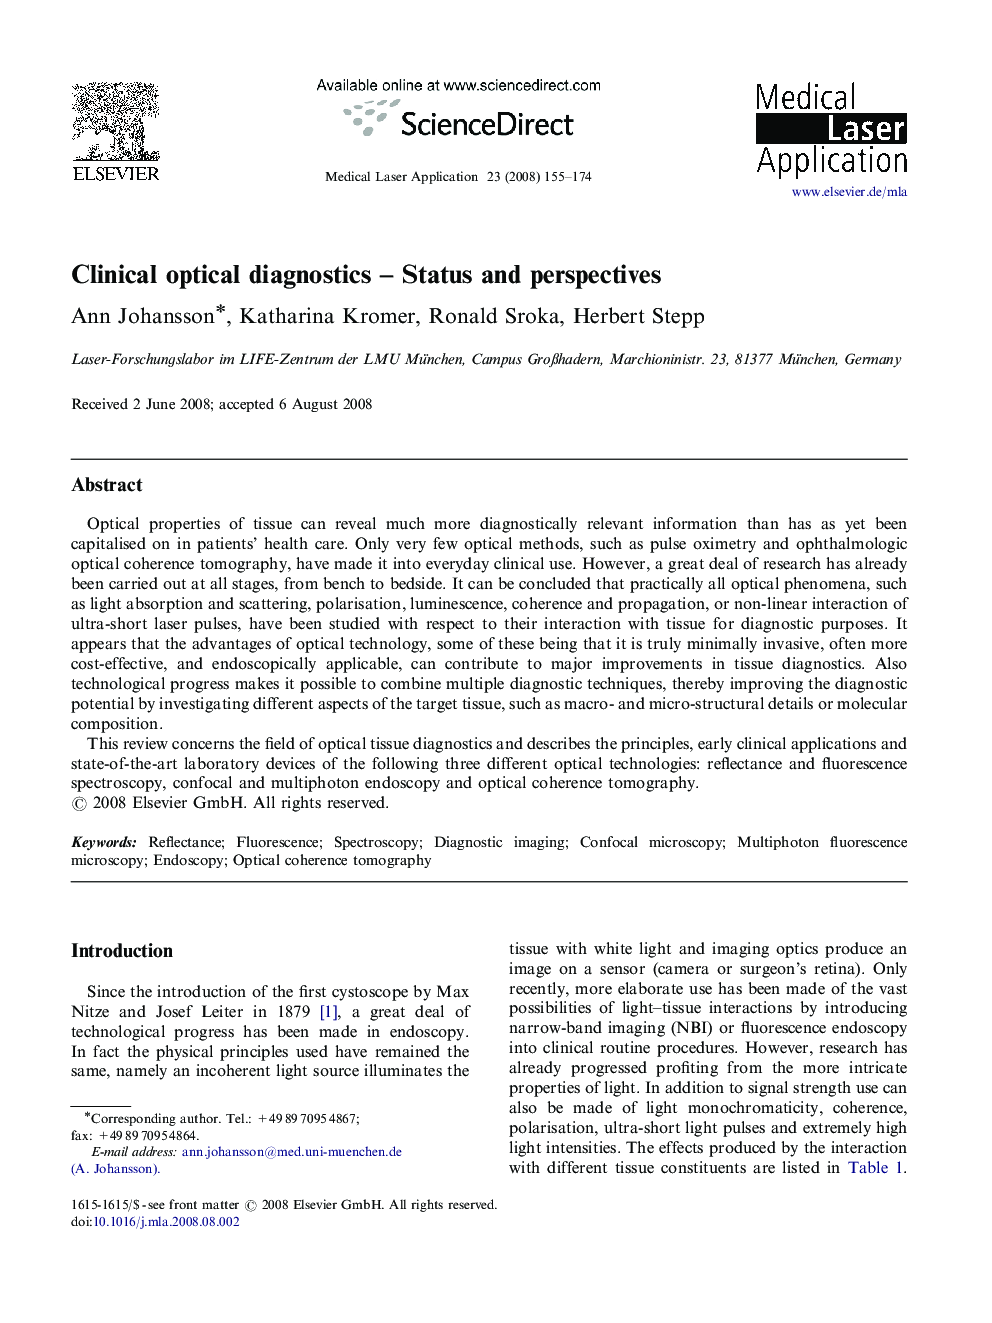 Clinical optical diagnostics – Status and perspectives